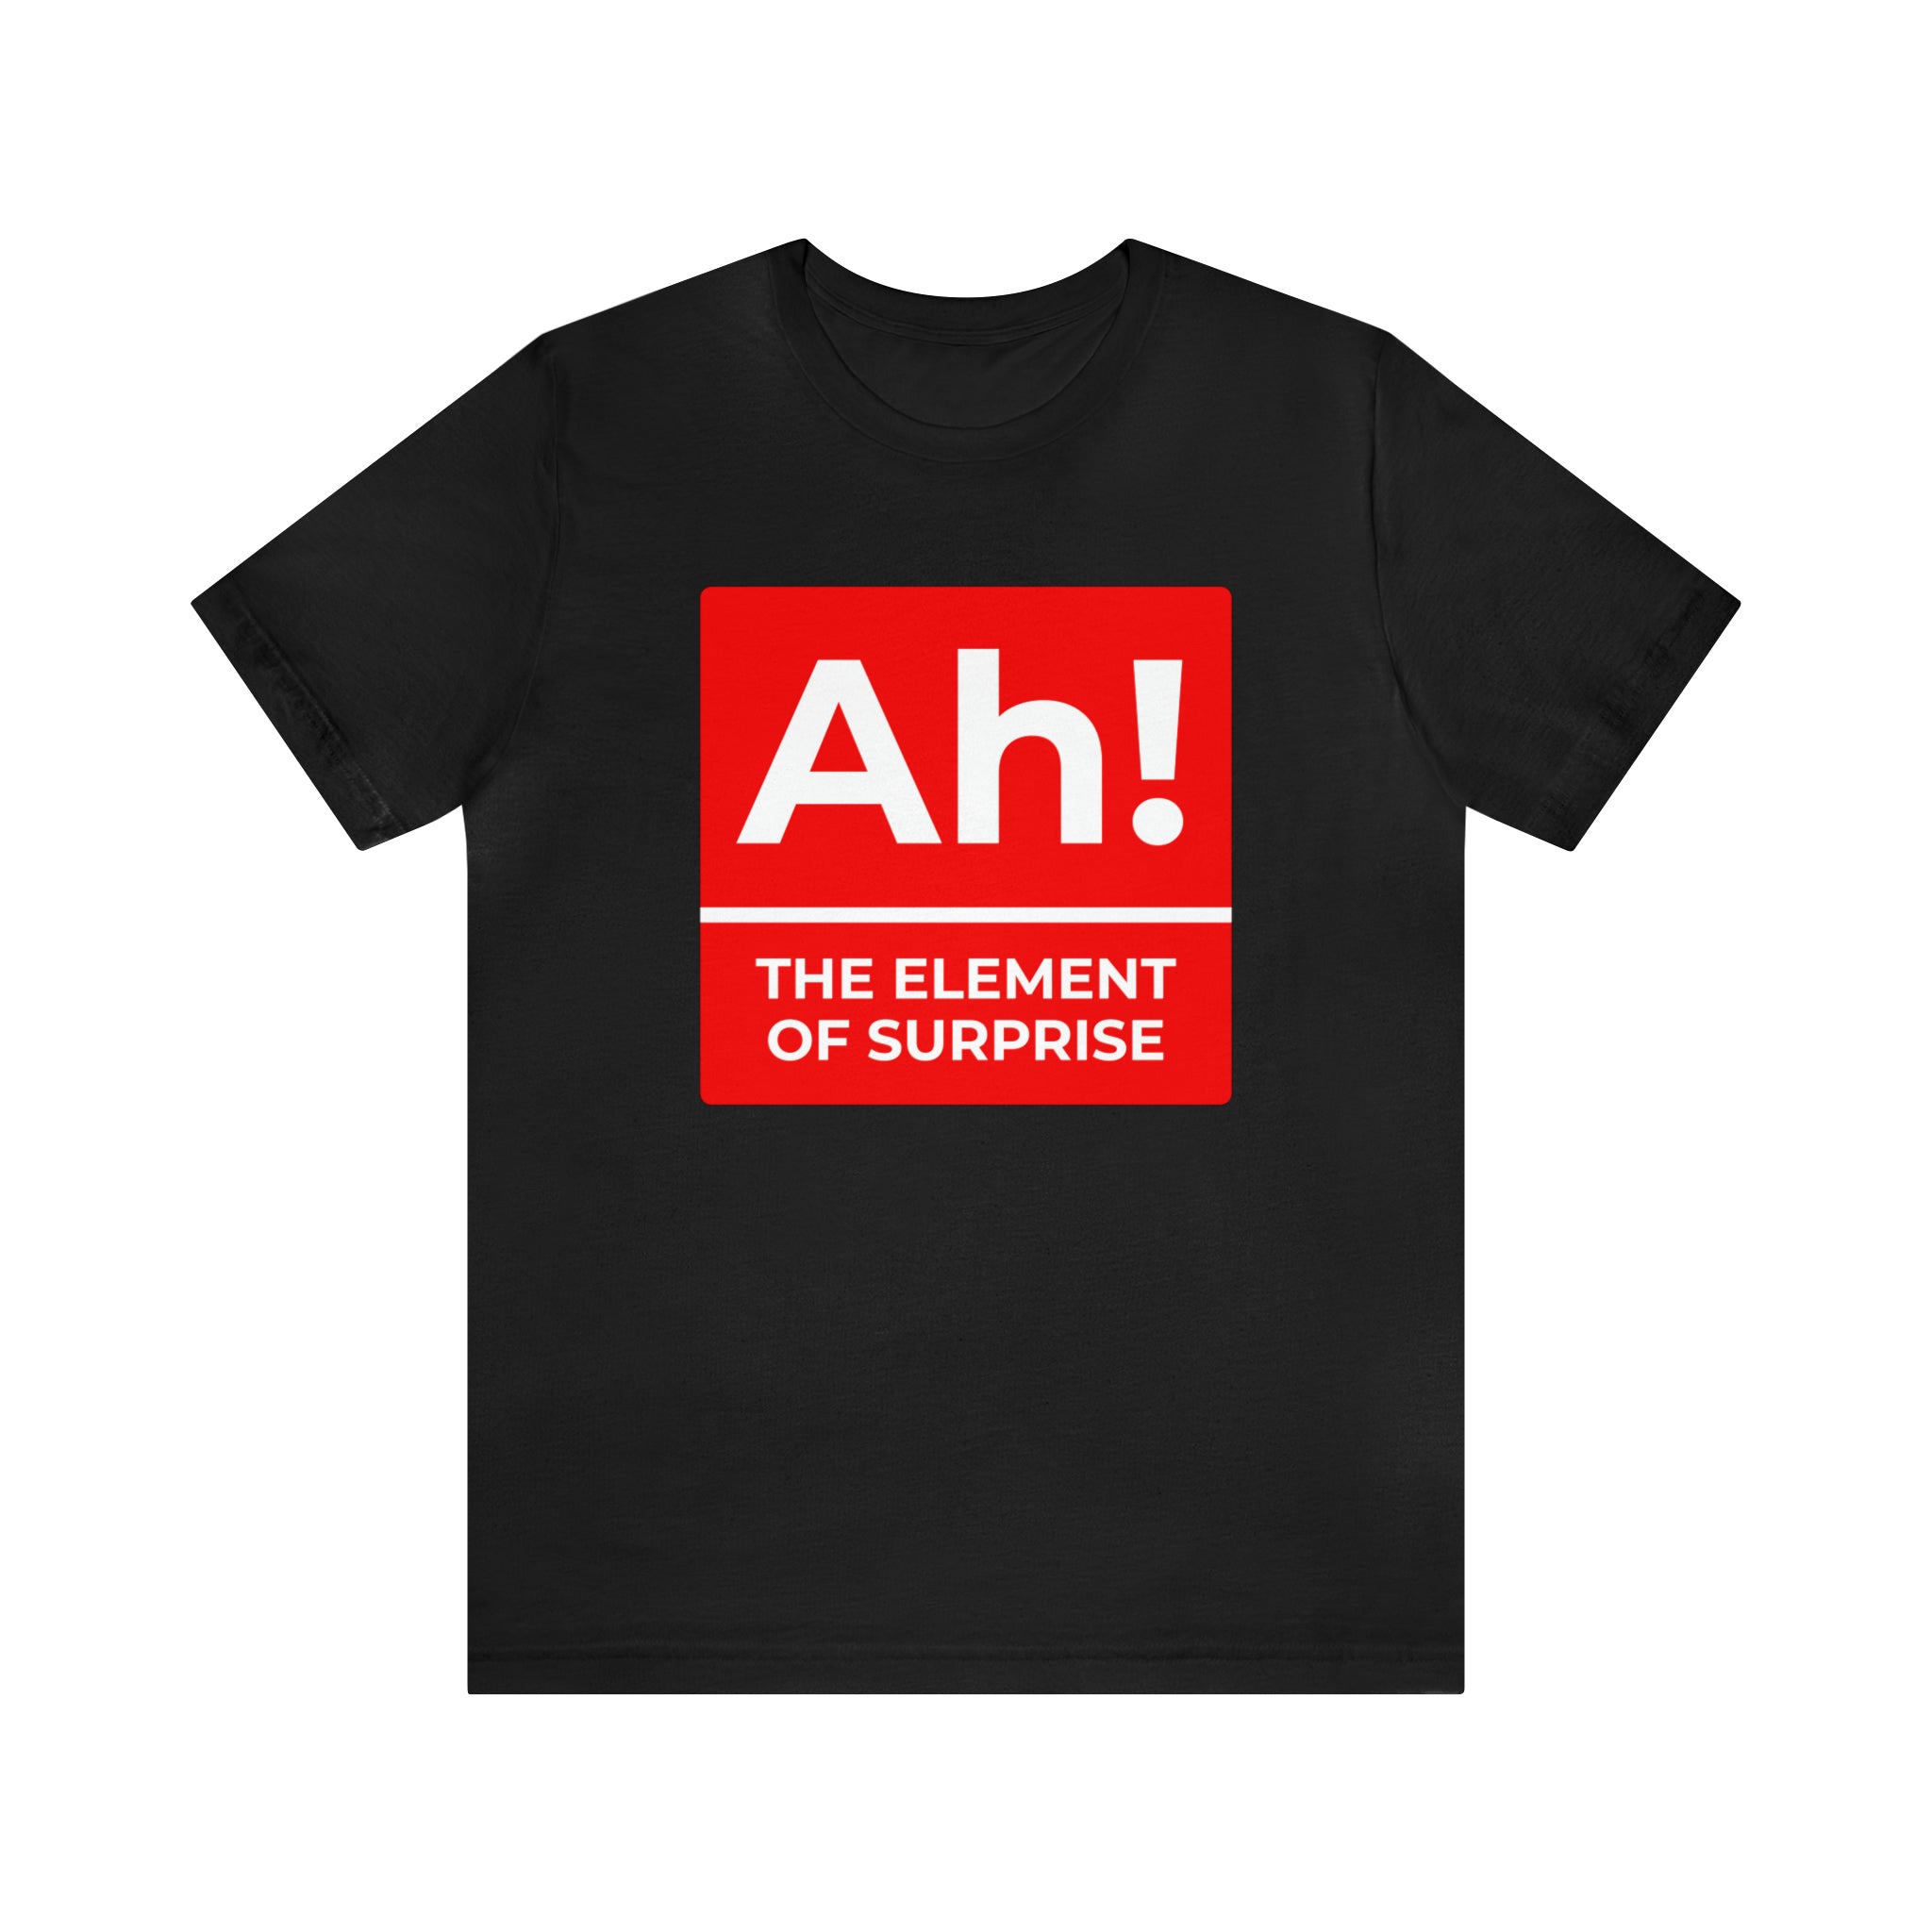 A science-themed Ah! the Element of Surprise T-shirt.